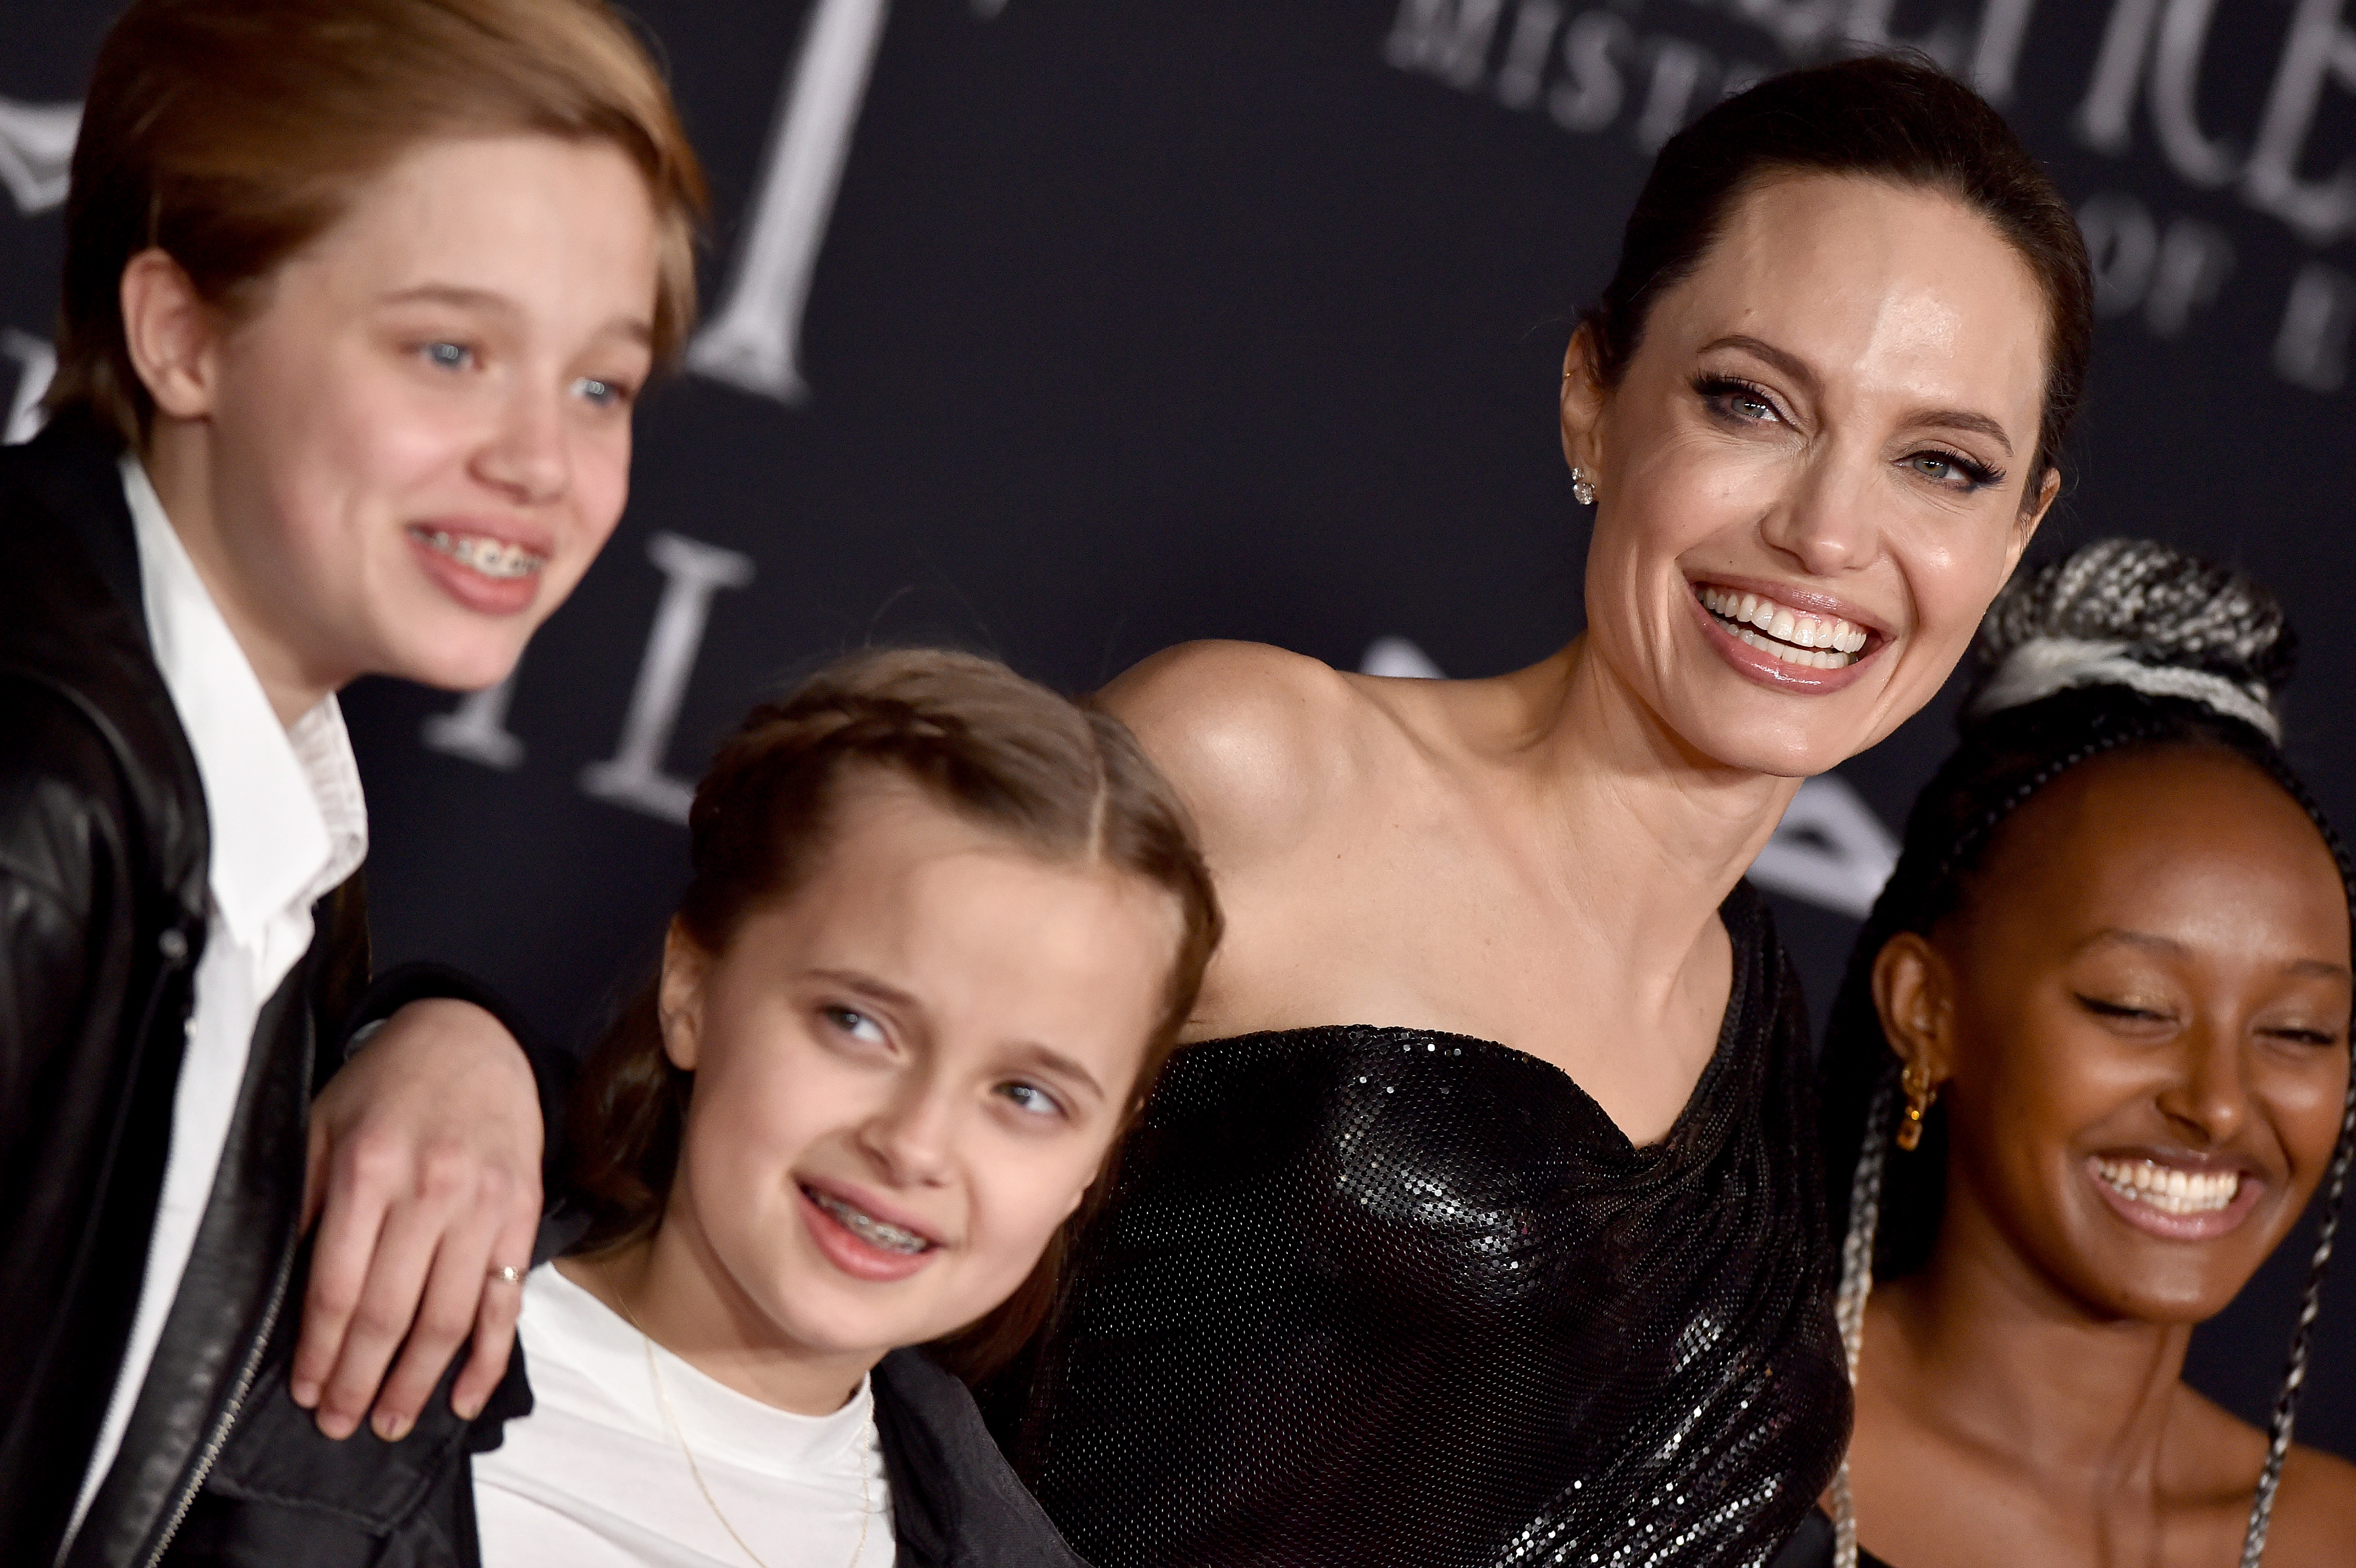 Shiloh Nouvel, Vivienne Marcheline, Angelina Jolie, and Zahara Marley attend the World Premiere of Disney's “Maleficent: Mistress of Evil" at El Capitan Theatre in Los Angeles, California, on September 30, 2019. | Source: Getty Images